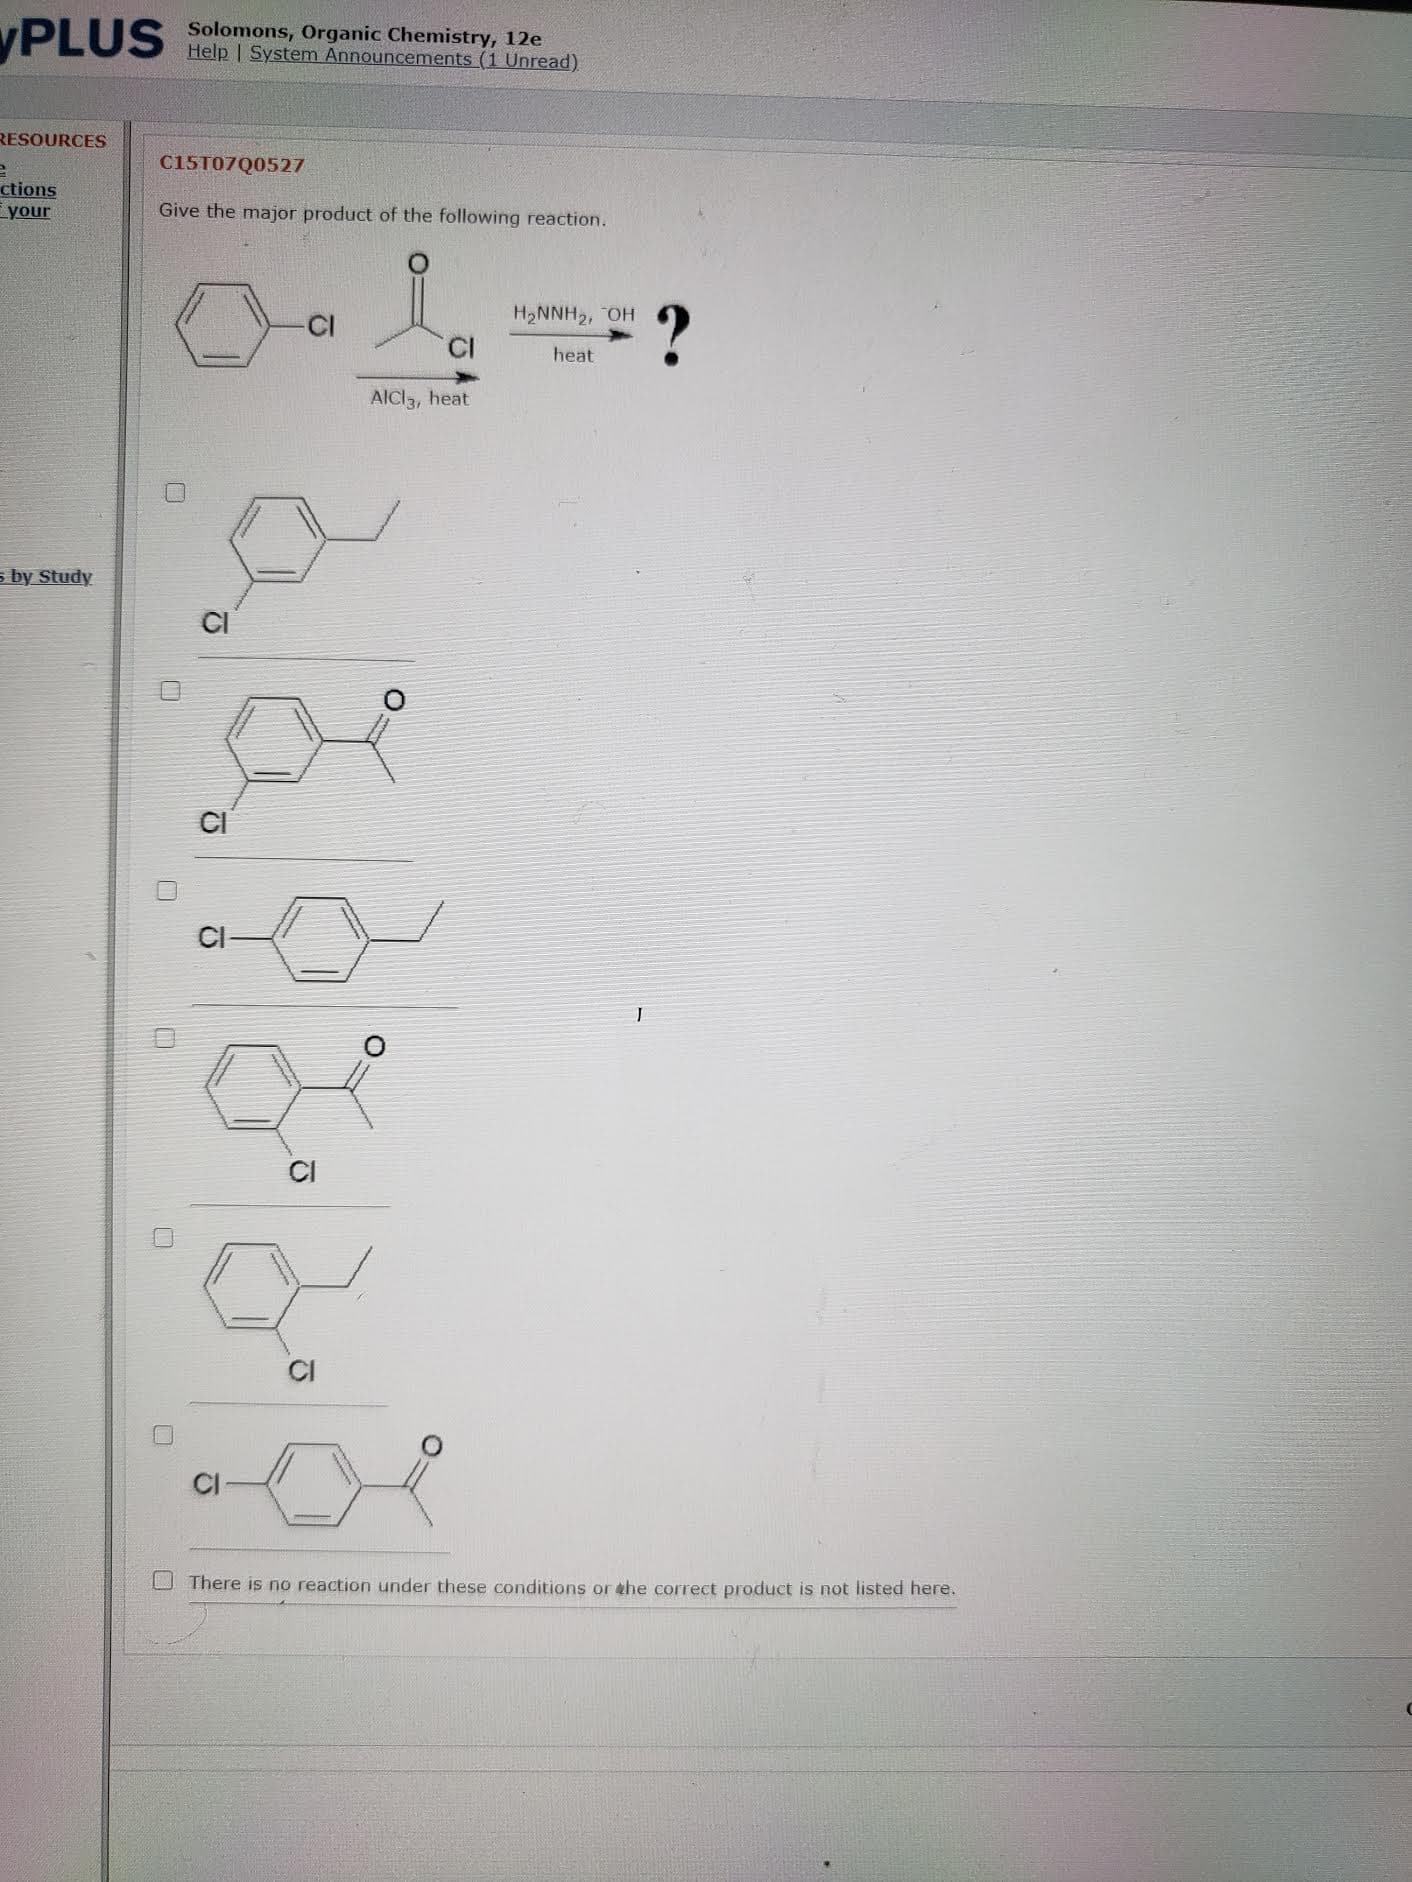 Give the major product of the following reaction.
?
H2NNH2, OH
CI
heat
AICI3, heat
CI
CI
CI
U There is no reaction under these conditions or ehe correct product is not listed here.
